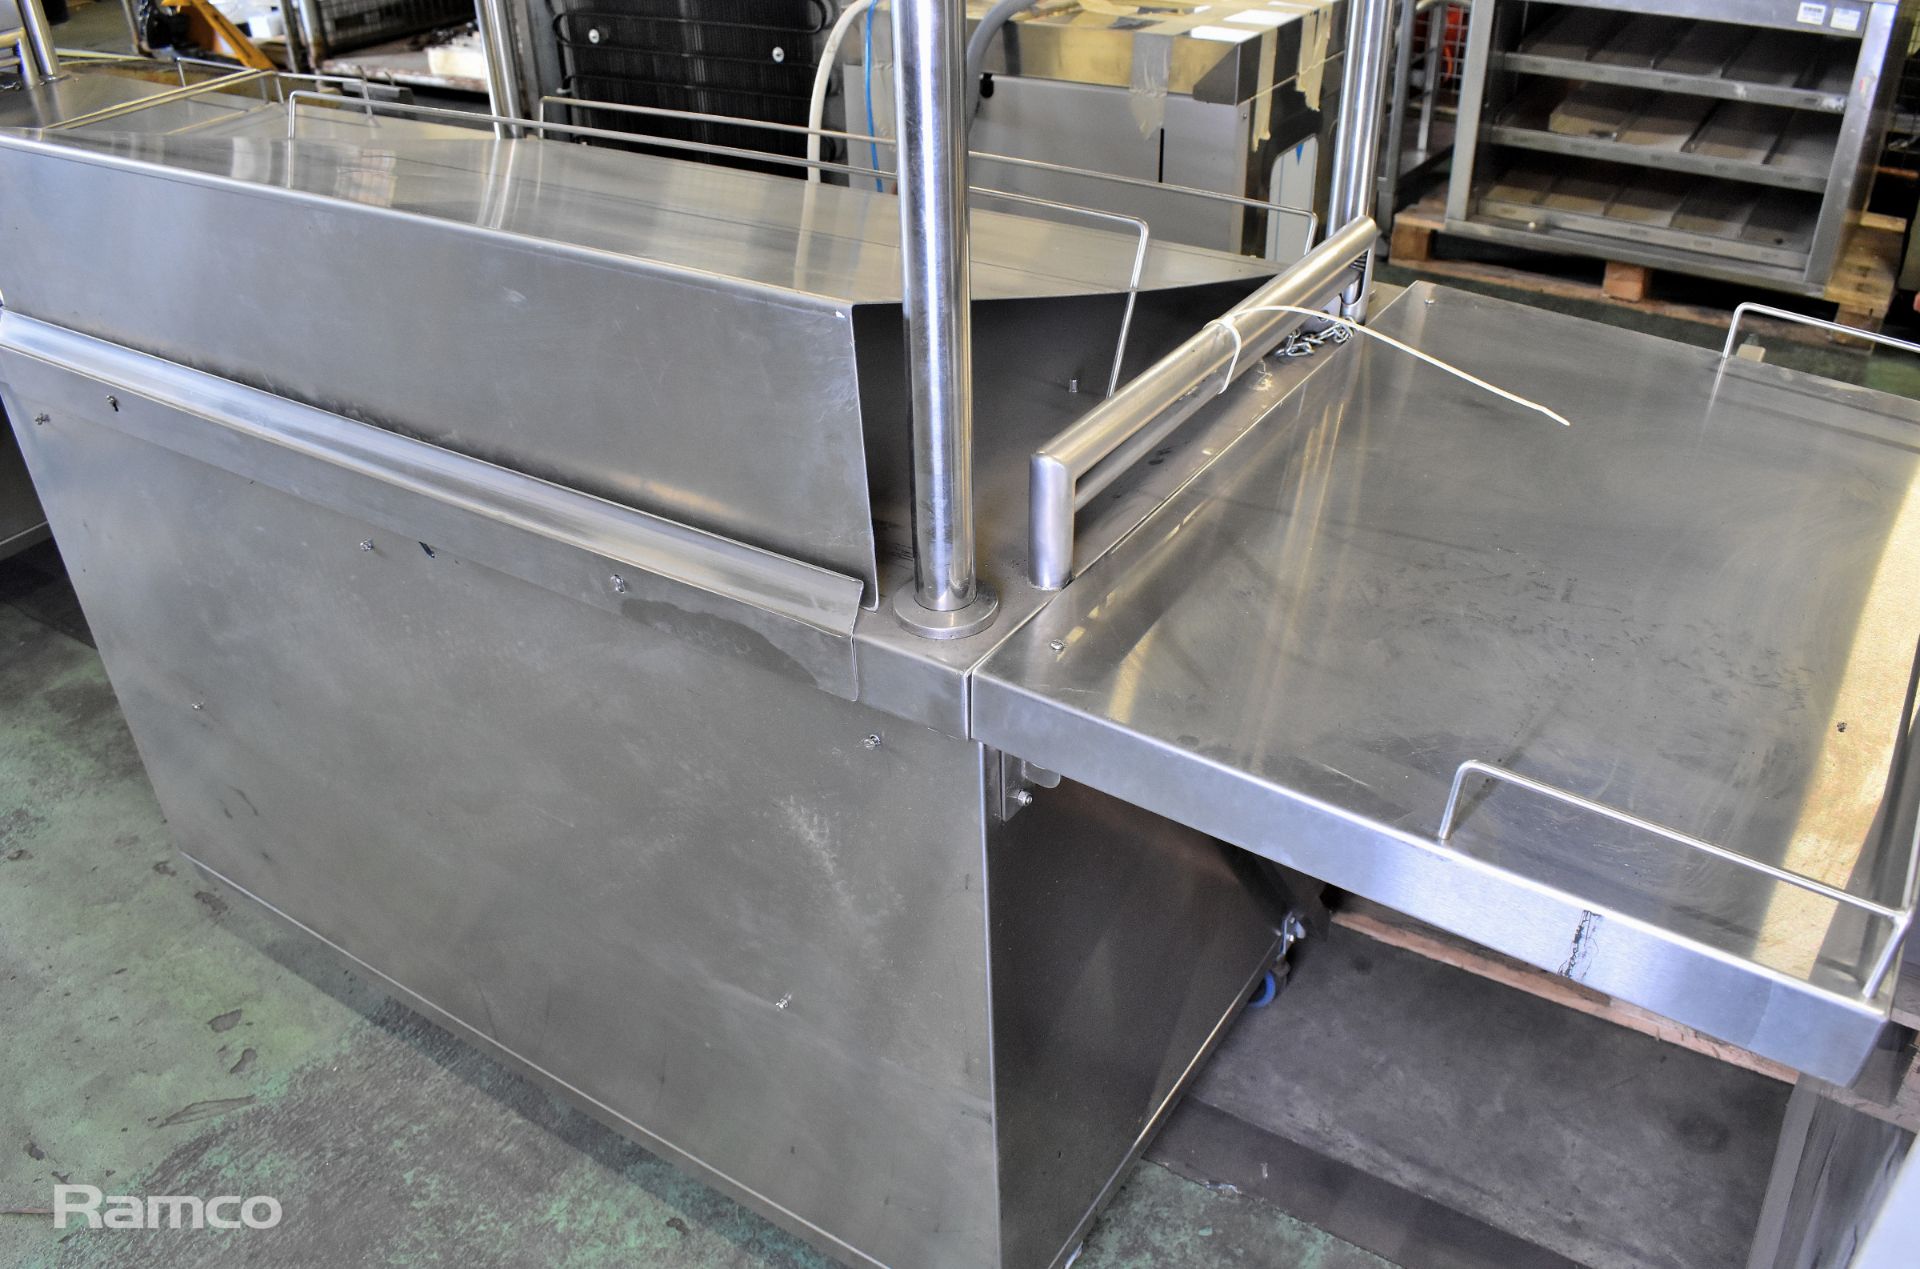 S.R.L stainless steel mobile display vender stand ( no keys ) - L 221 x W93 x H208cm - Image 3 of 10